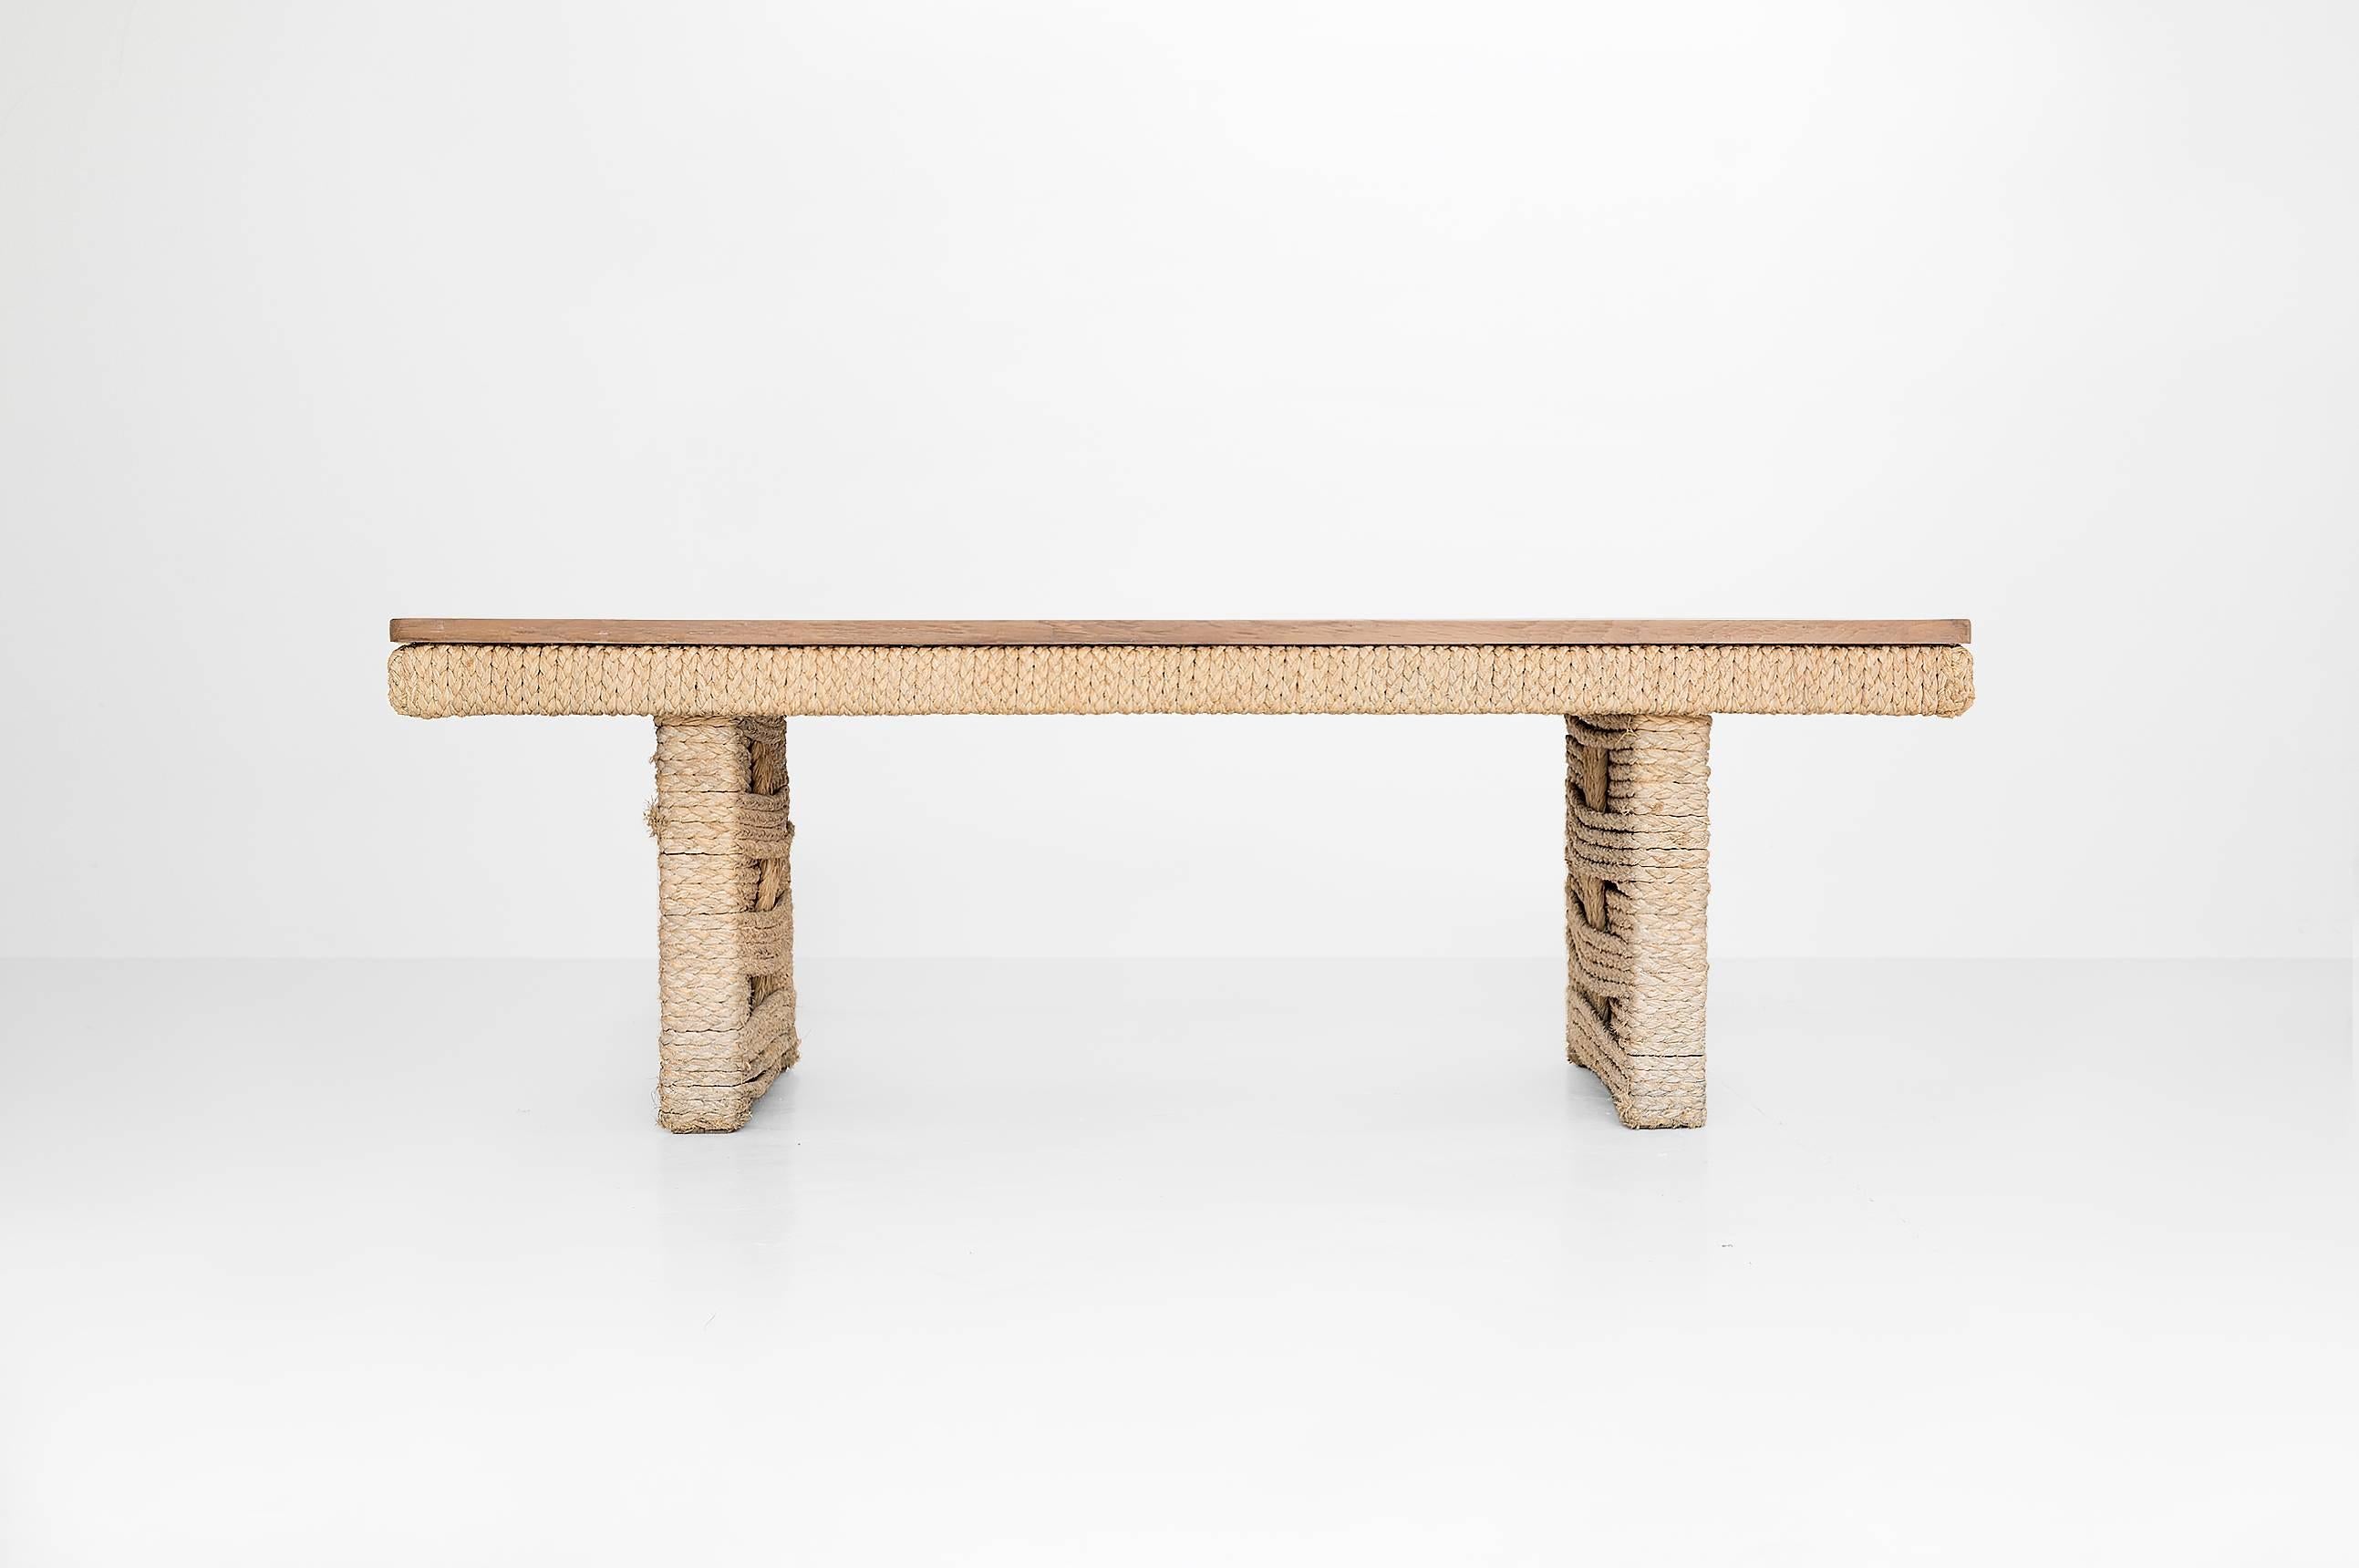 Adrian & Frida Audoux-Minet

Coffee table
Manufactured by Audoux-Minet
France, 1940
Rope, oak plywood

Measurements
130 cm x 46.5 cm x 45 H cm
51.2 in x 18.3 in x 17.7 H in

Condition
Perfect condition.